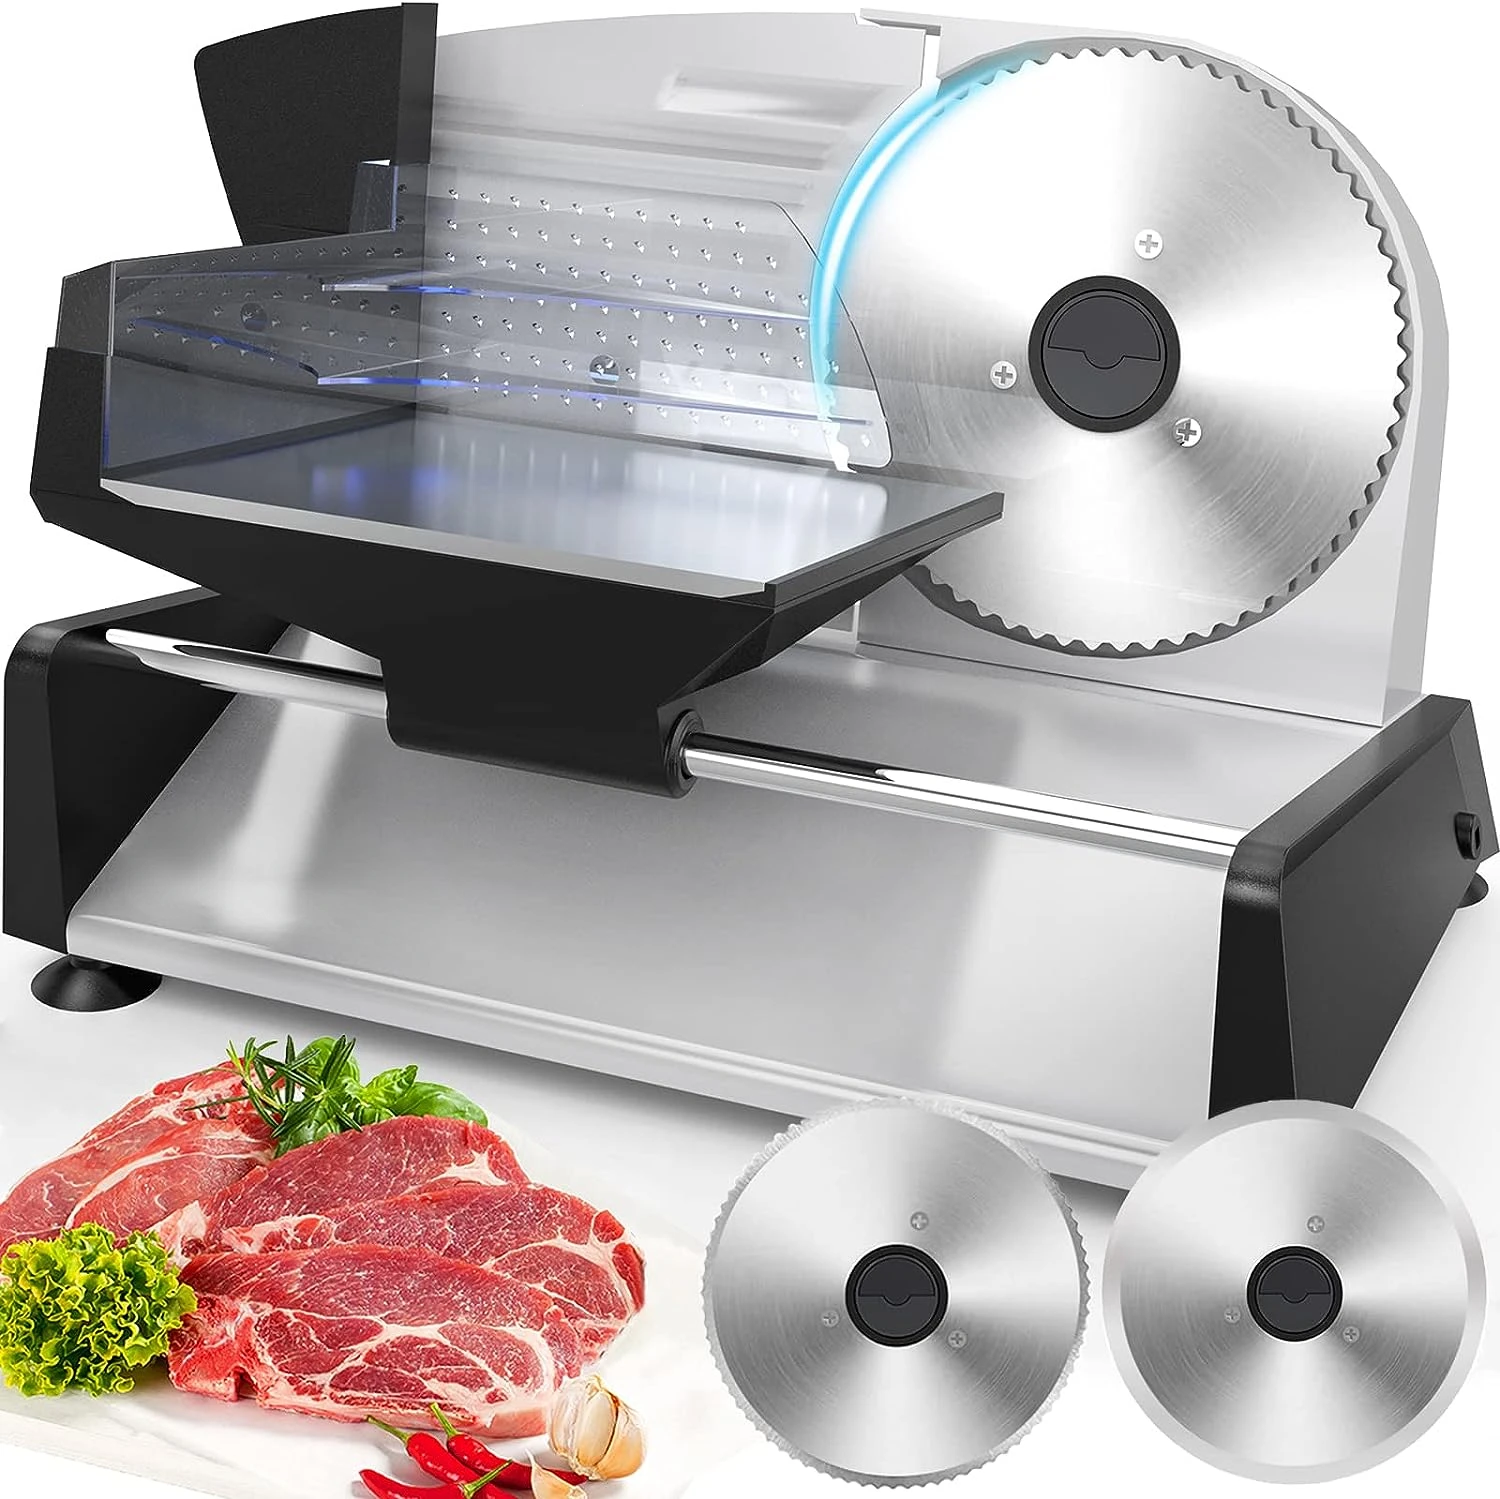 

Slicer Home Use Meat Slicer 2 7.5" Stainless Steel Blades 0-15mm Adjustable Thickness Slicing Machine Powerful Kitchen Del